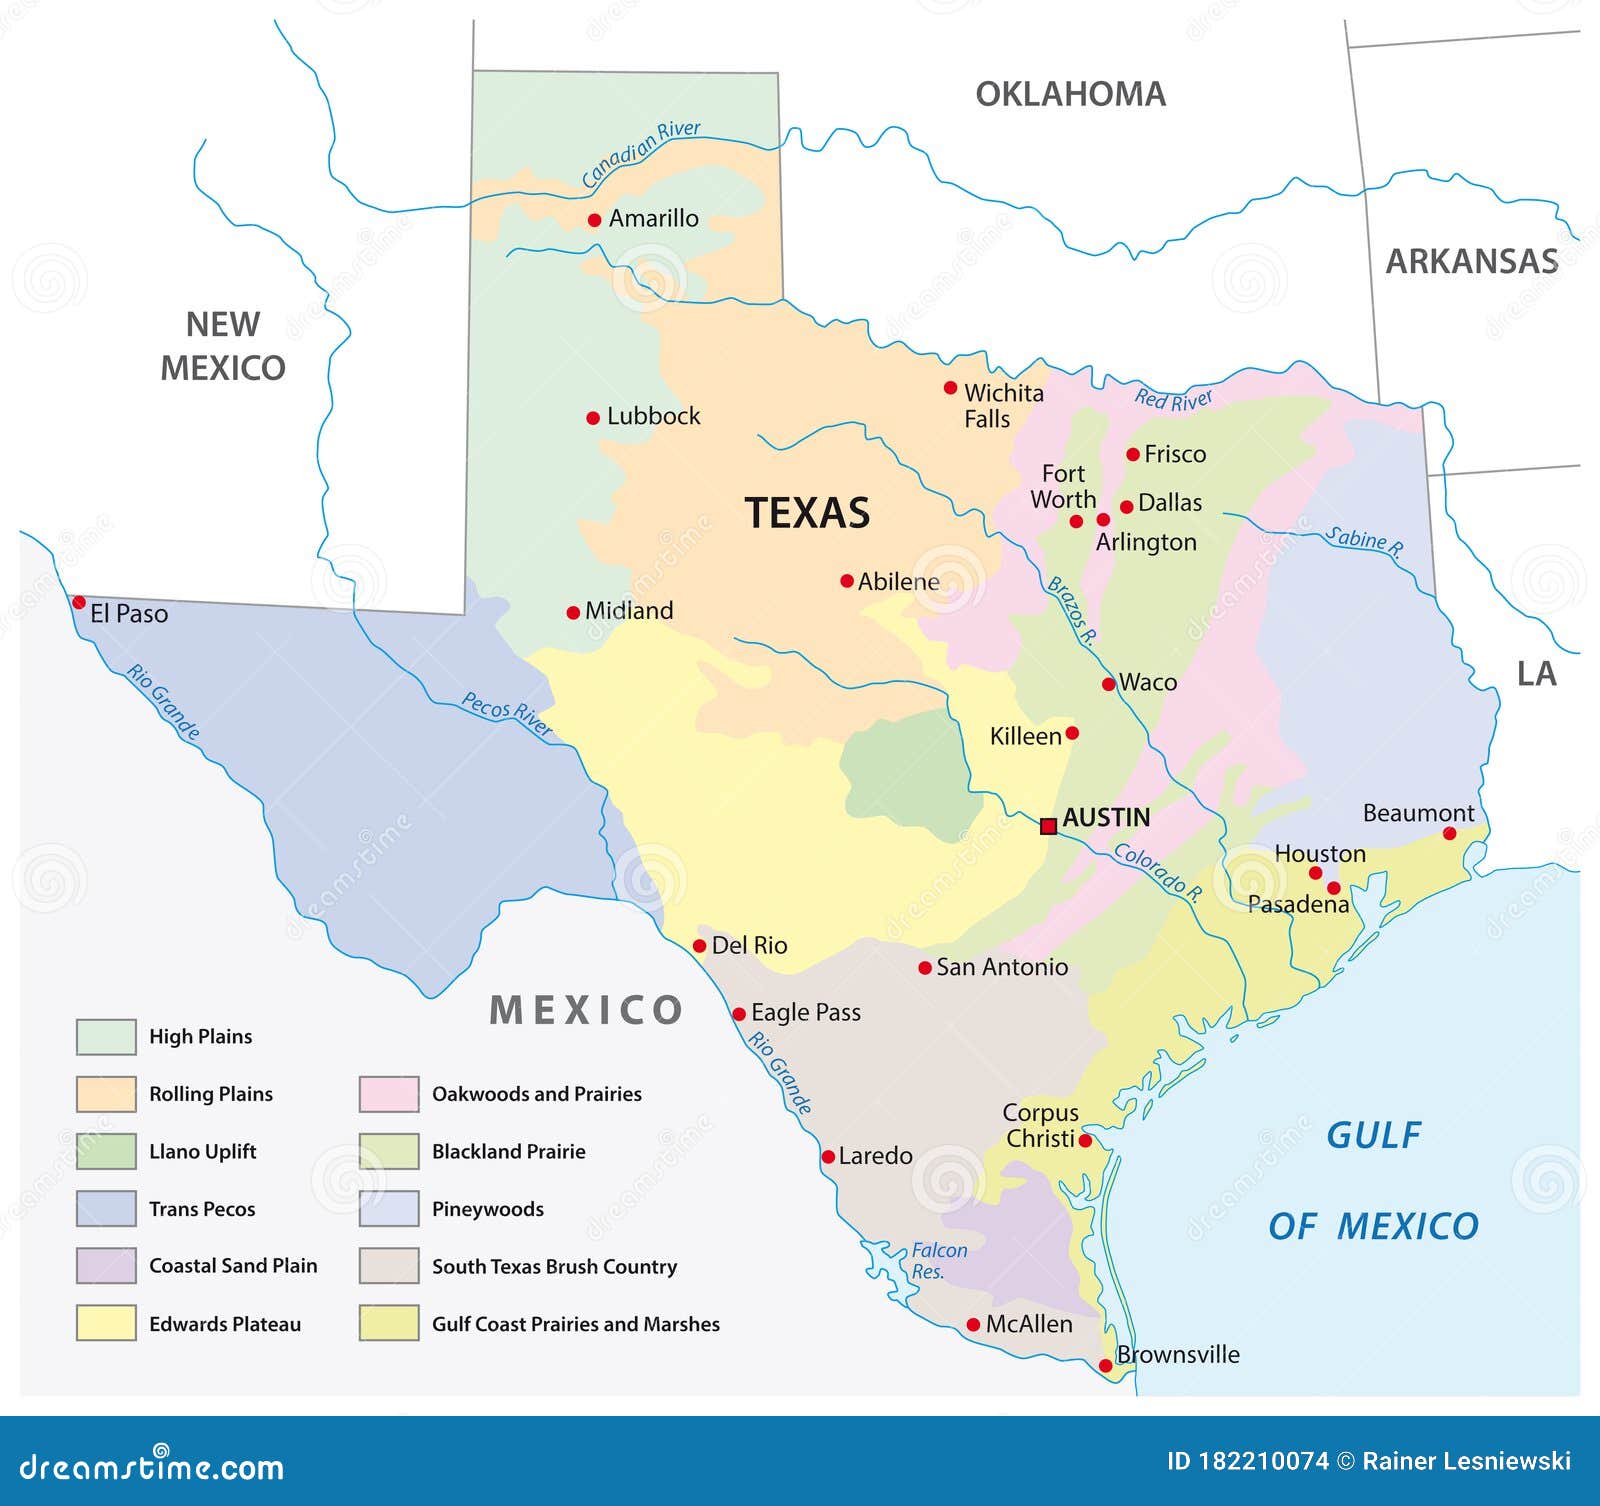  map of the physical regions of texas